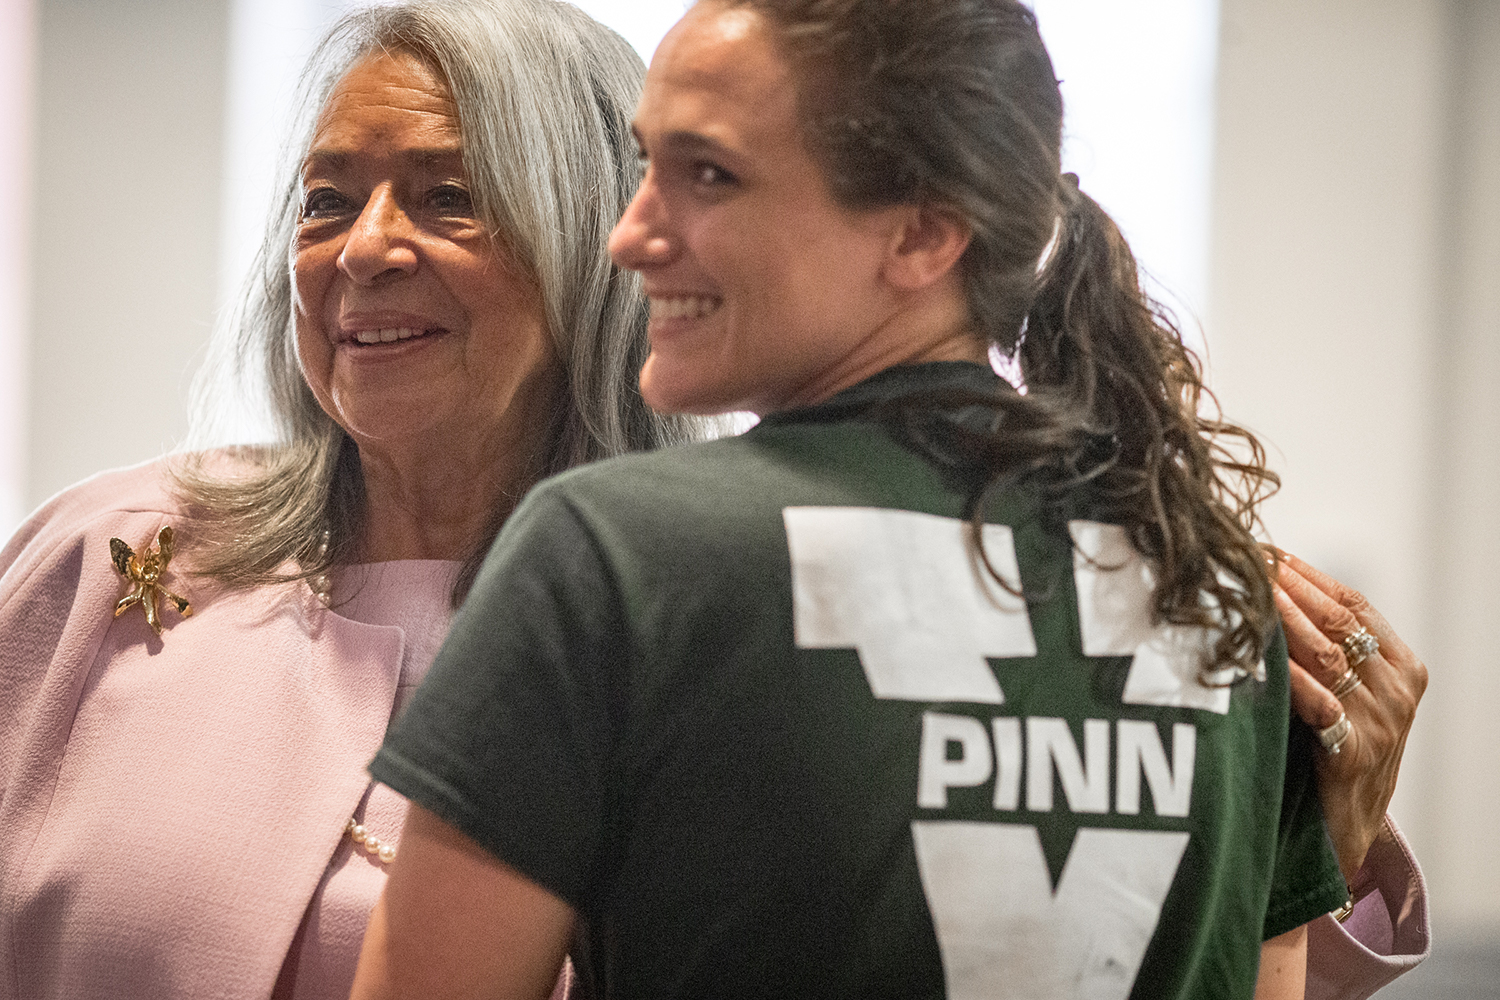 Two women stand together.  One has a shirt that has a UVA V with the word PINN in the middle